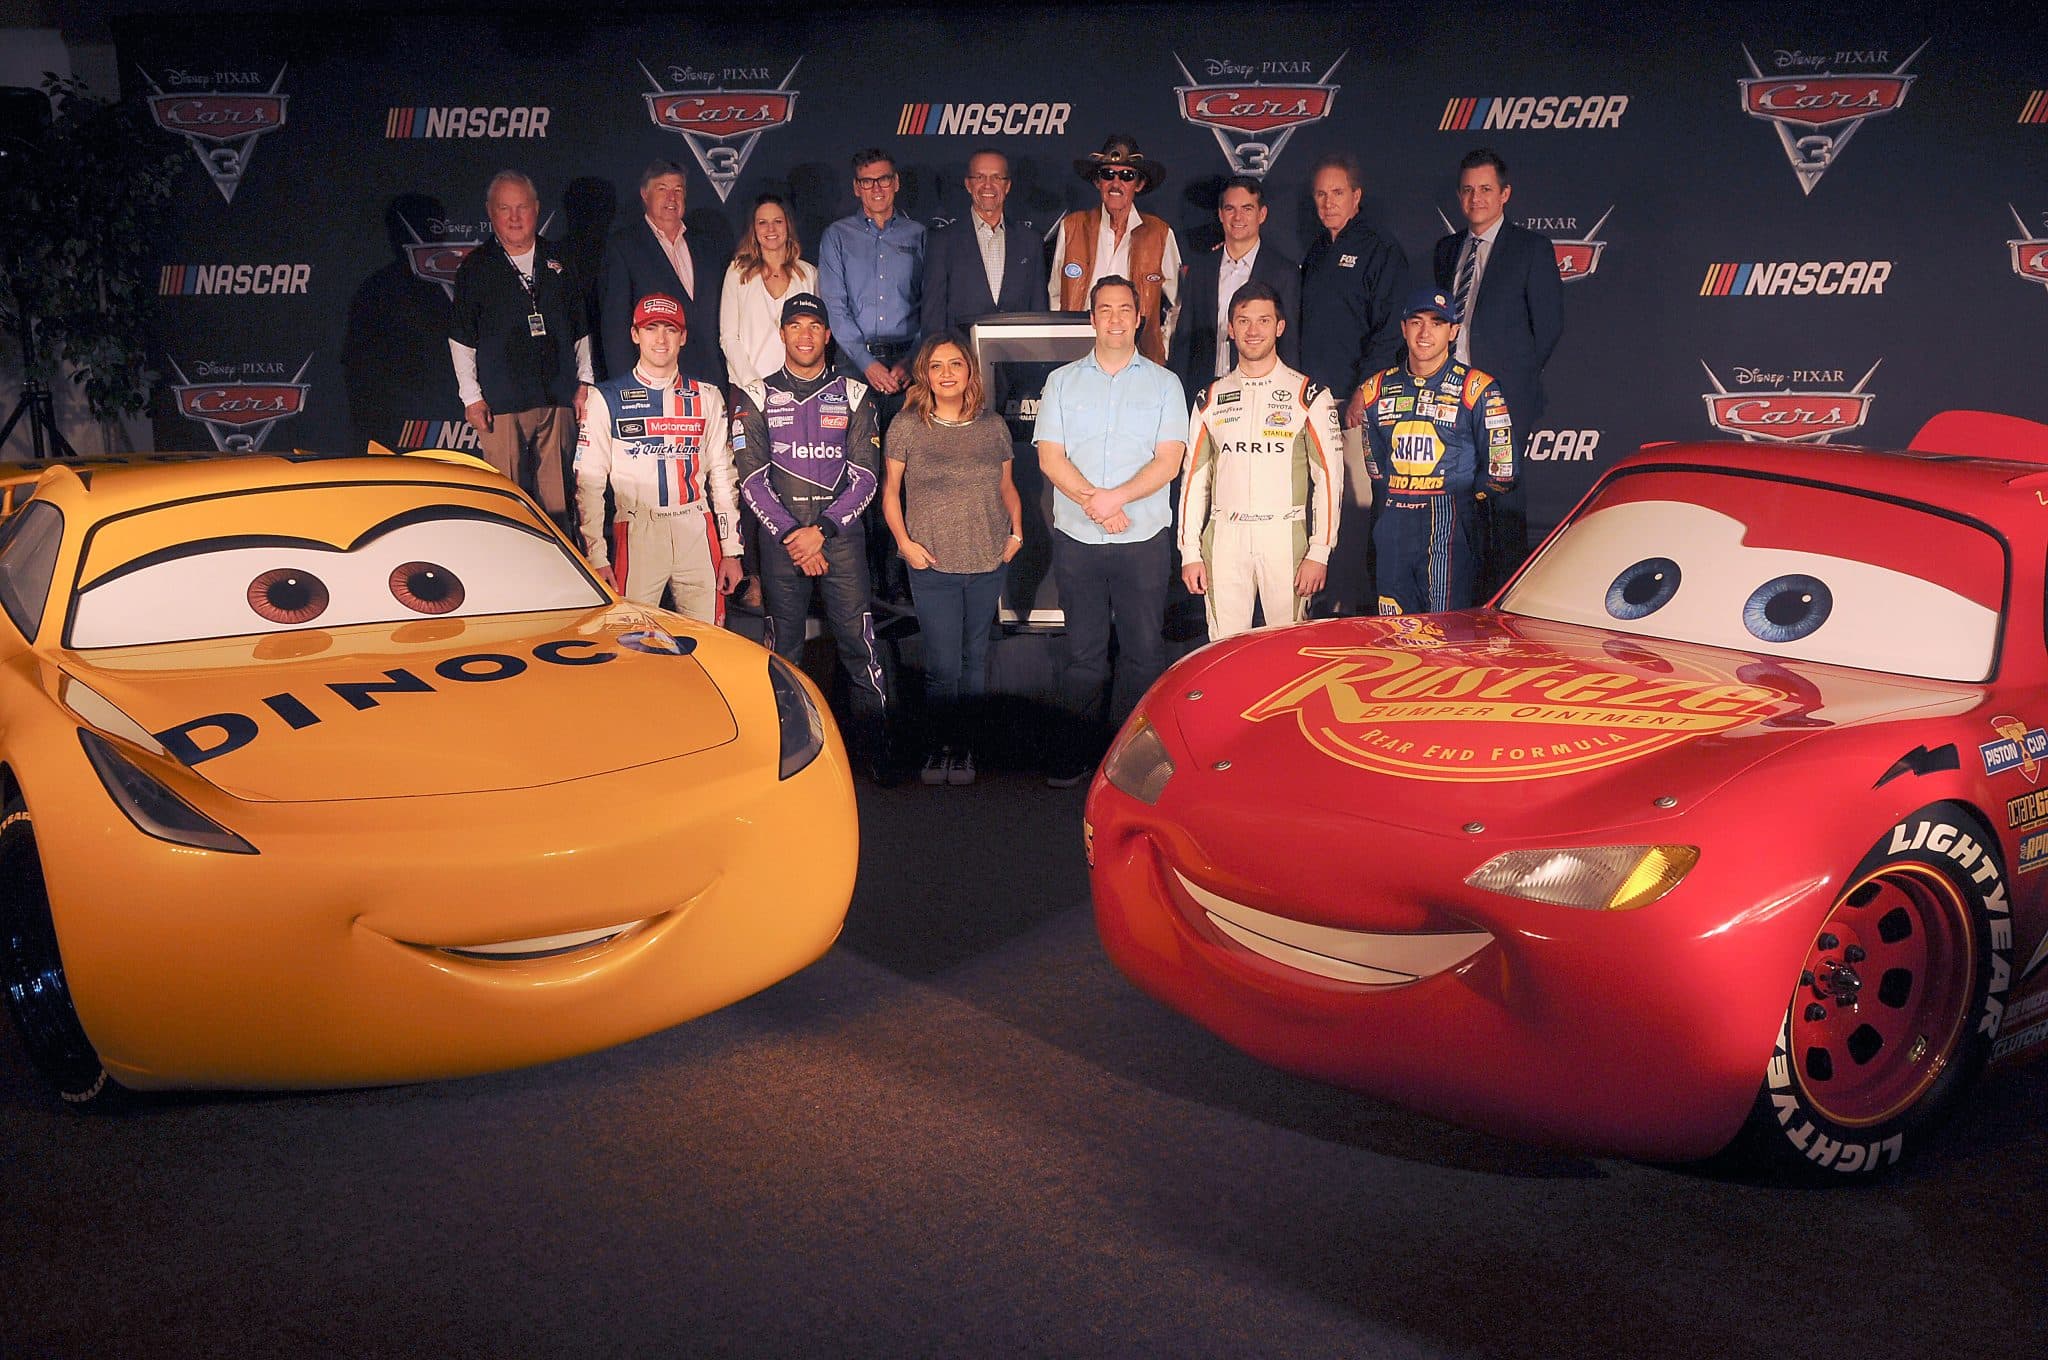 CARS 3 "Next Generation" Extended Look Now Available!!! #Cars3